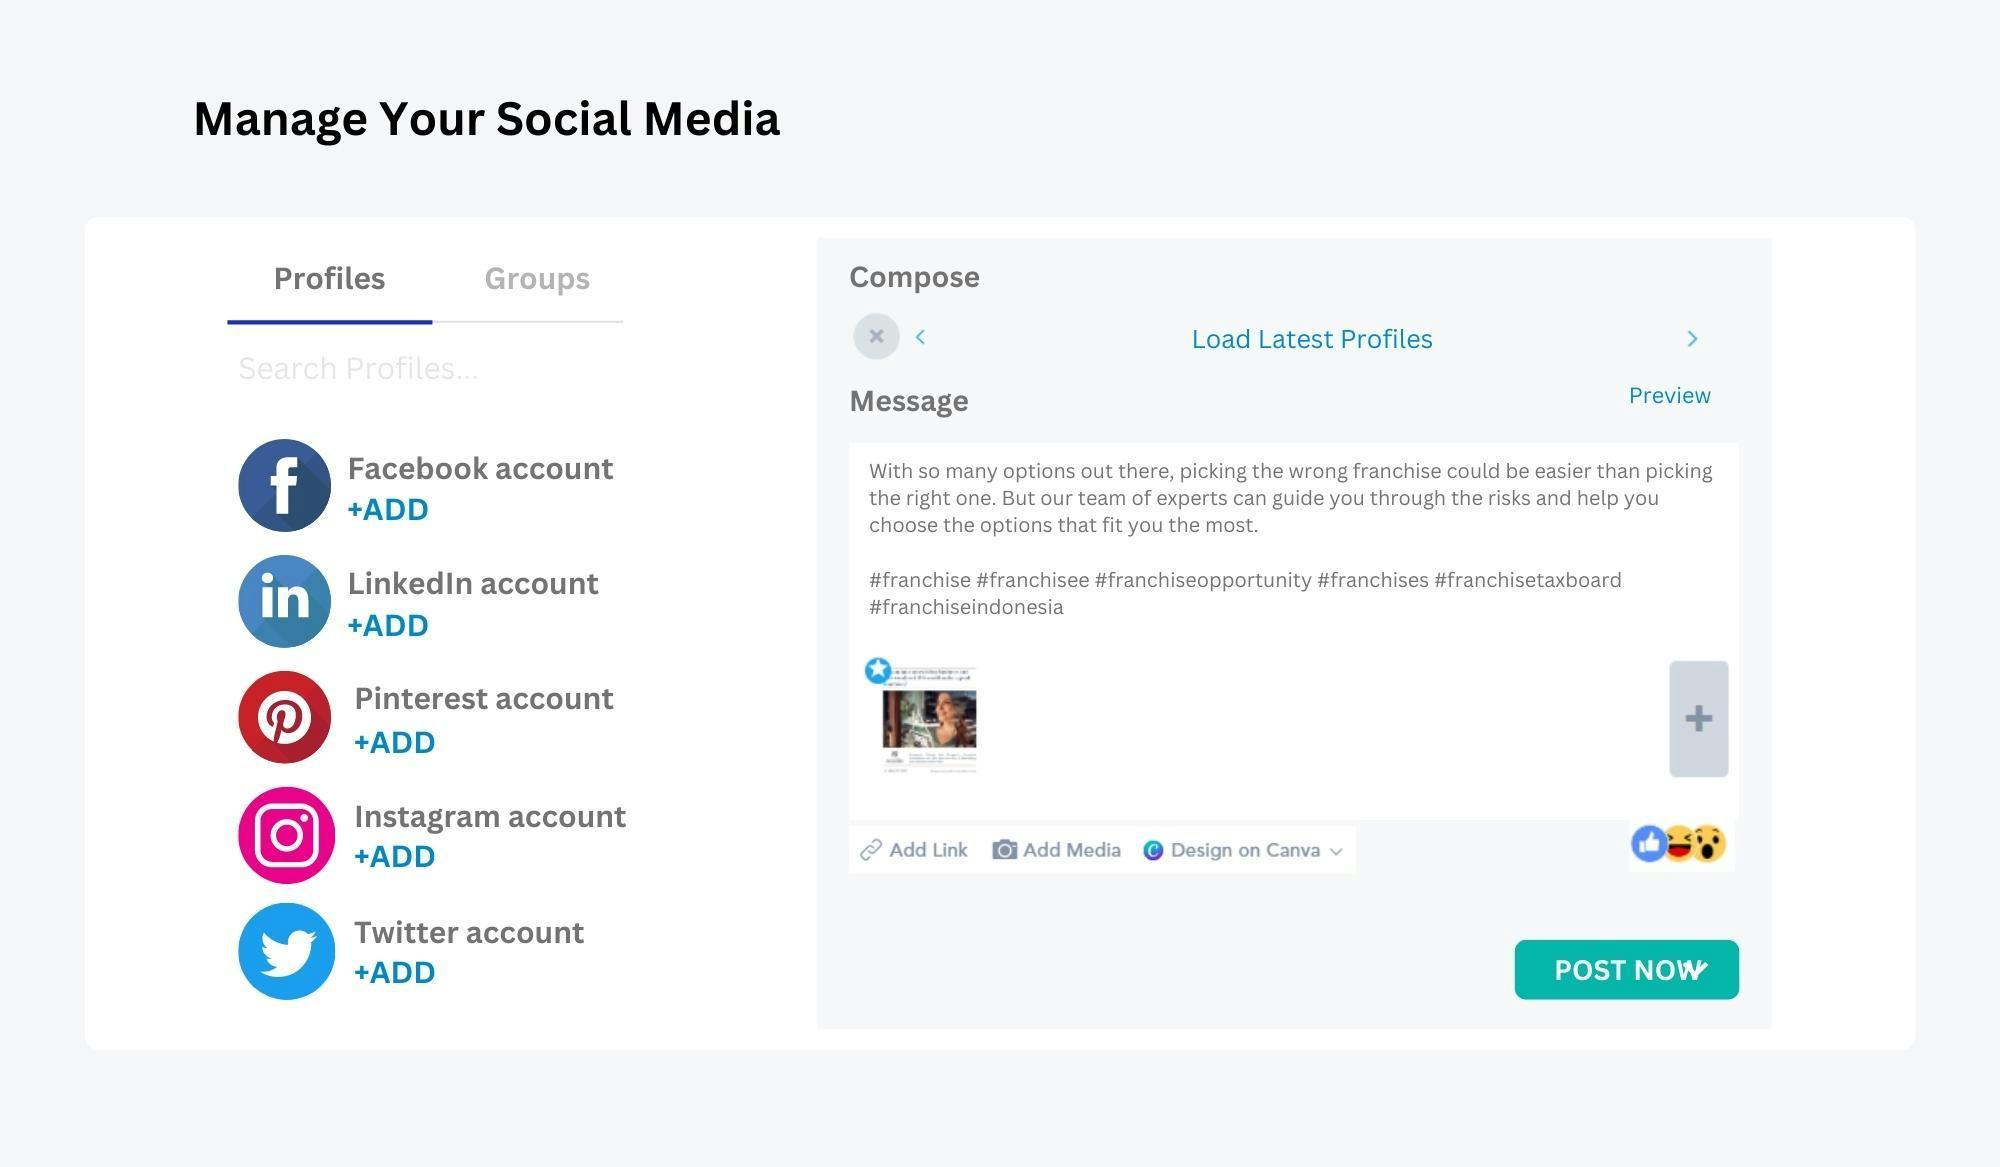 VBOUT Software - Control all your social media channels from one place without the need to manage them separately.